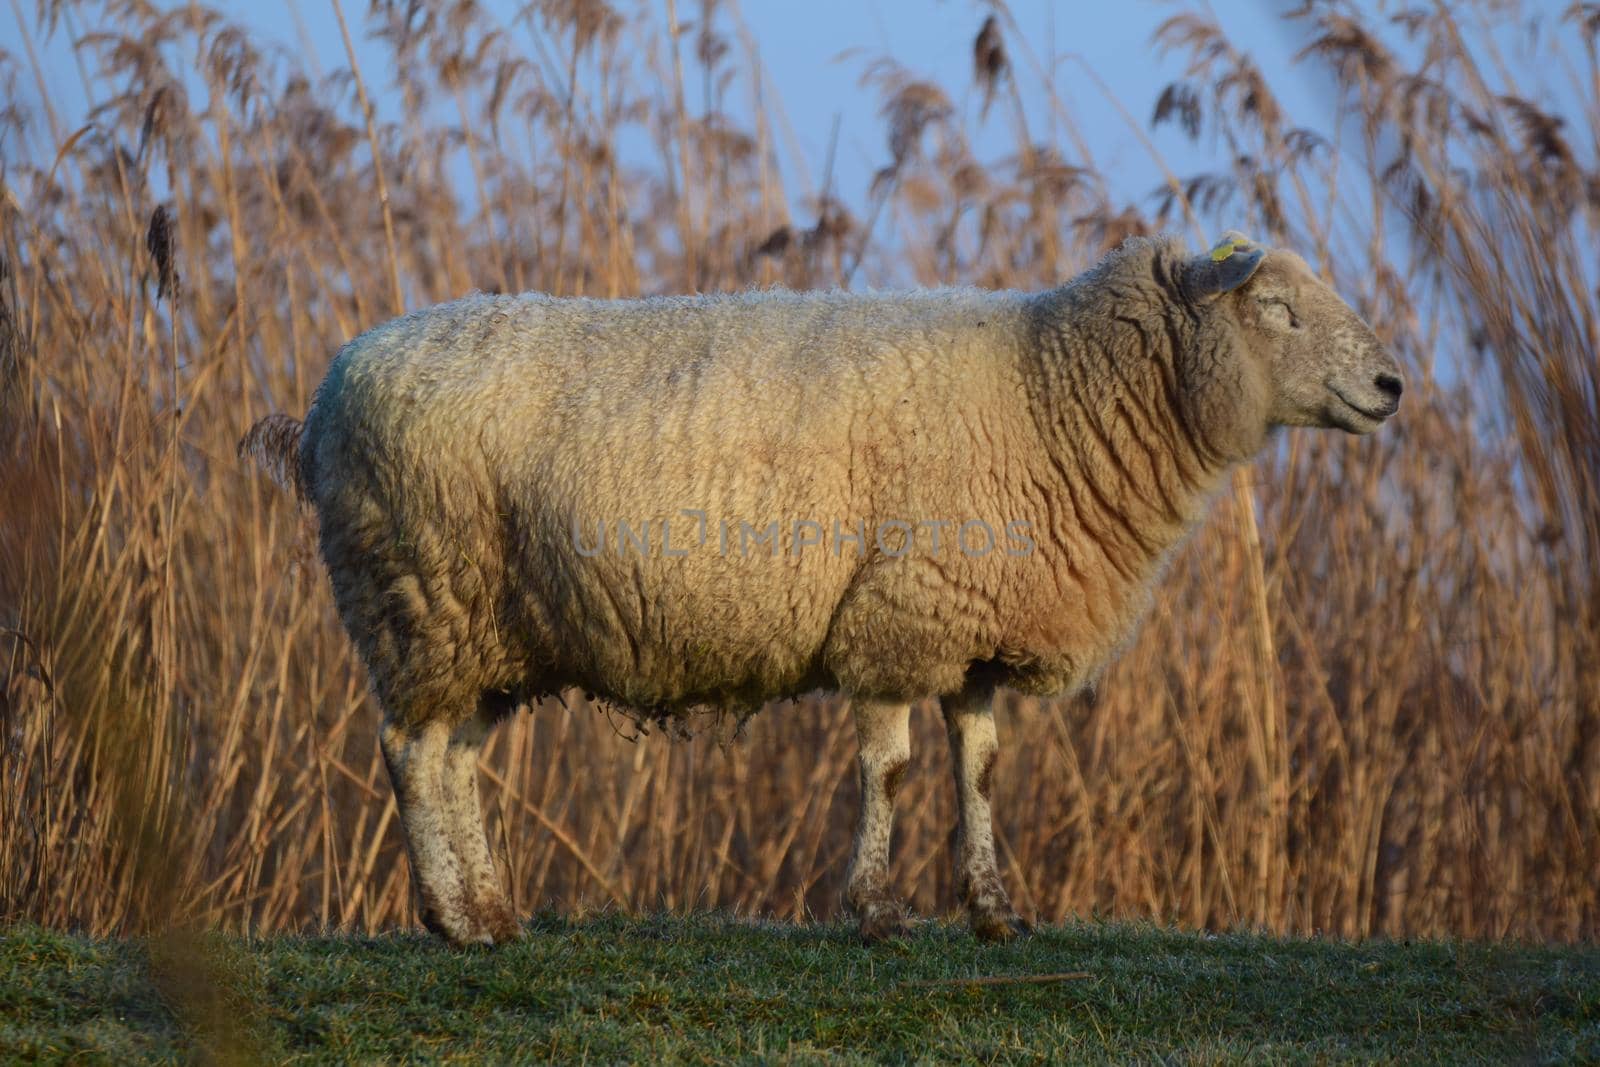 One white sheep standing on a dike by Luise123